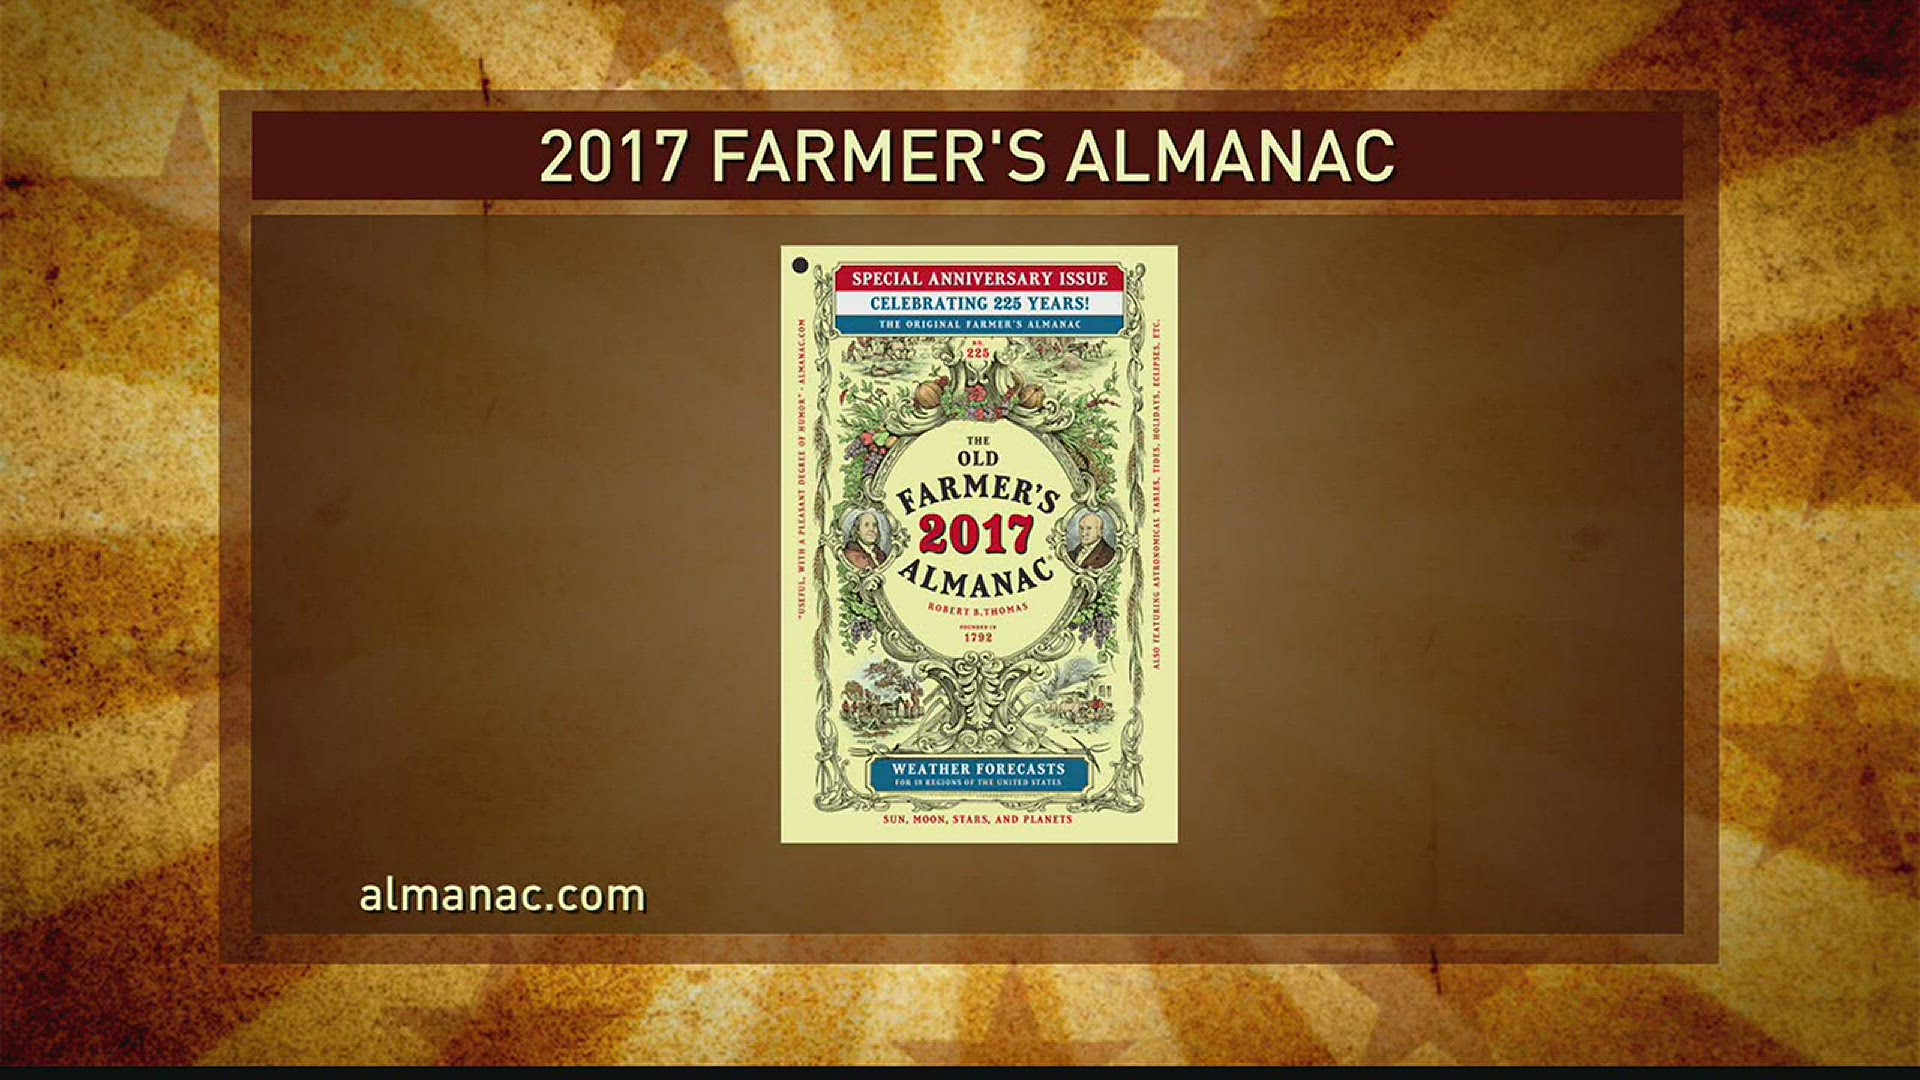 September 28, 2016Live at Five at 4An interview with Tim Clark, one of the faces and voices of The Old Farmer's Almanac 2017 is on sale now. For more information visit almanac.comTitle: Light The Night walk set for October 25, 2016